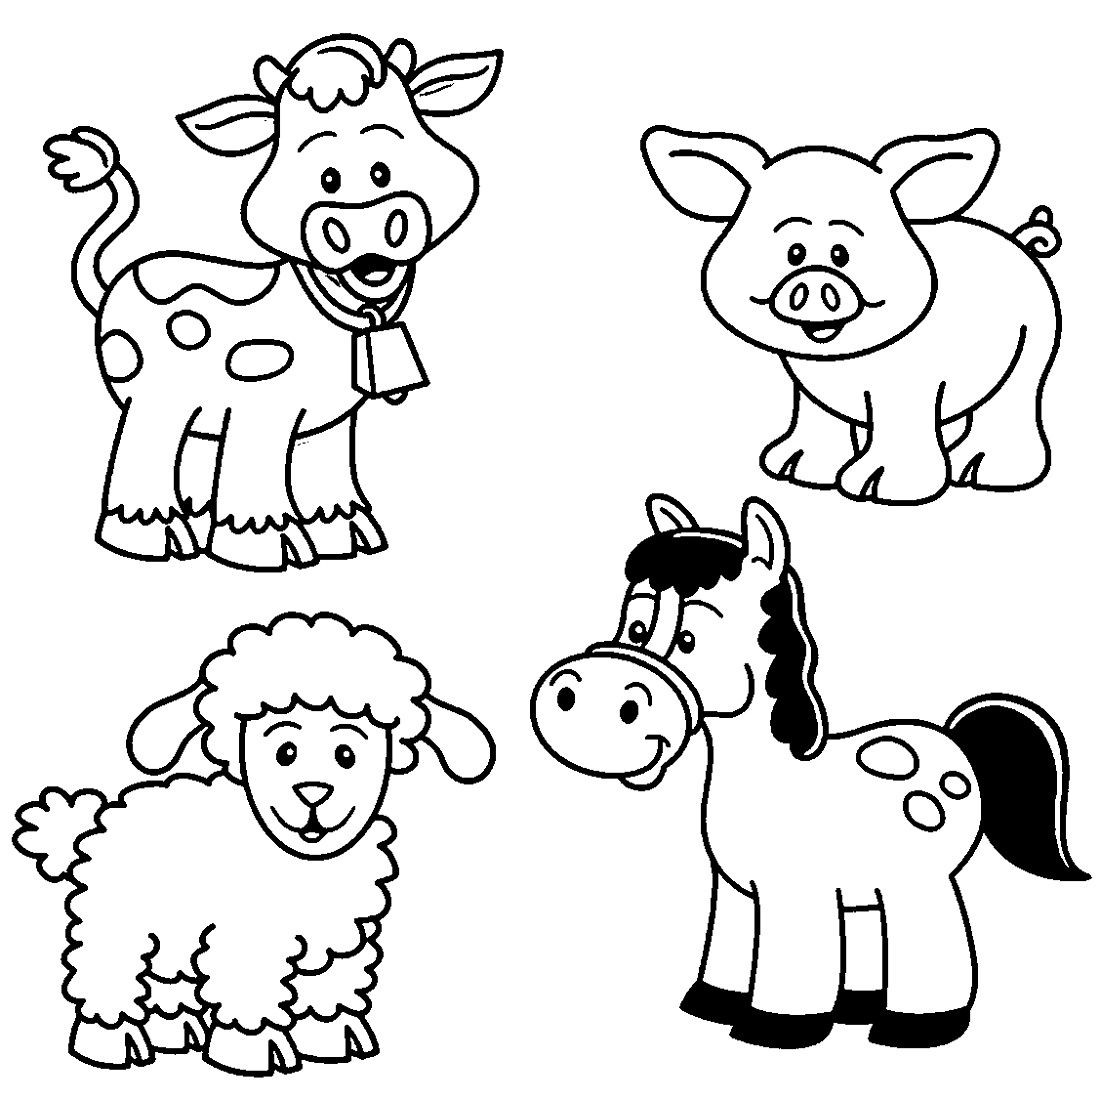 Baby Farm Animal Coloring Pages
 Printable Farm Animal Coloring for Kindergarten